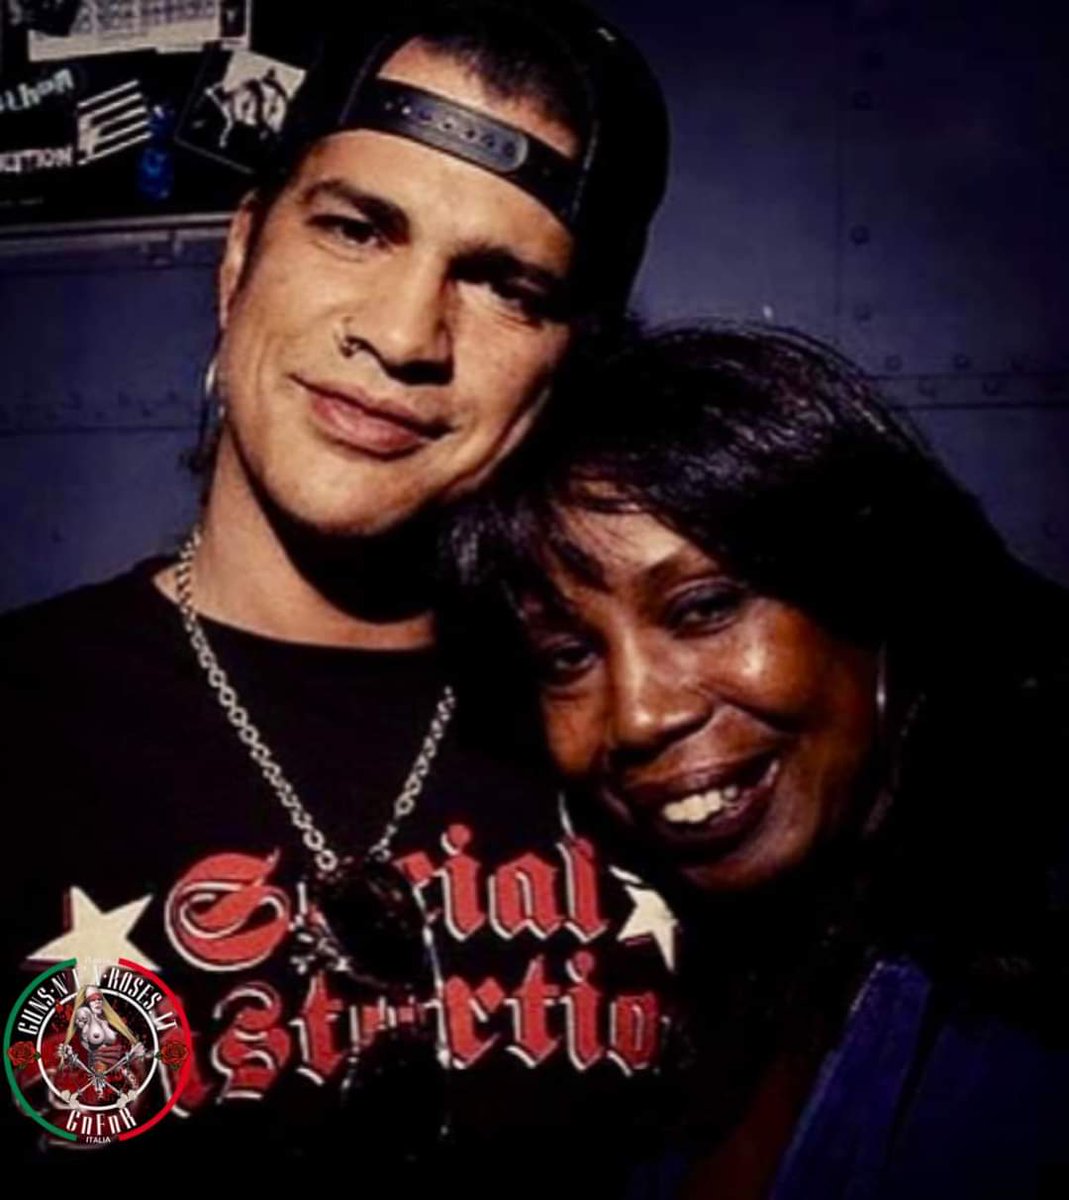 Slash of Guns N roses & his mother. let see how many negatives comments by white trolls. their fan base fixing to take that [L] lmfao..